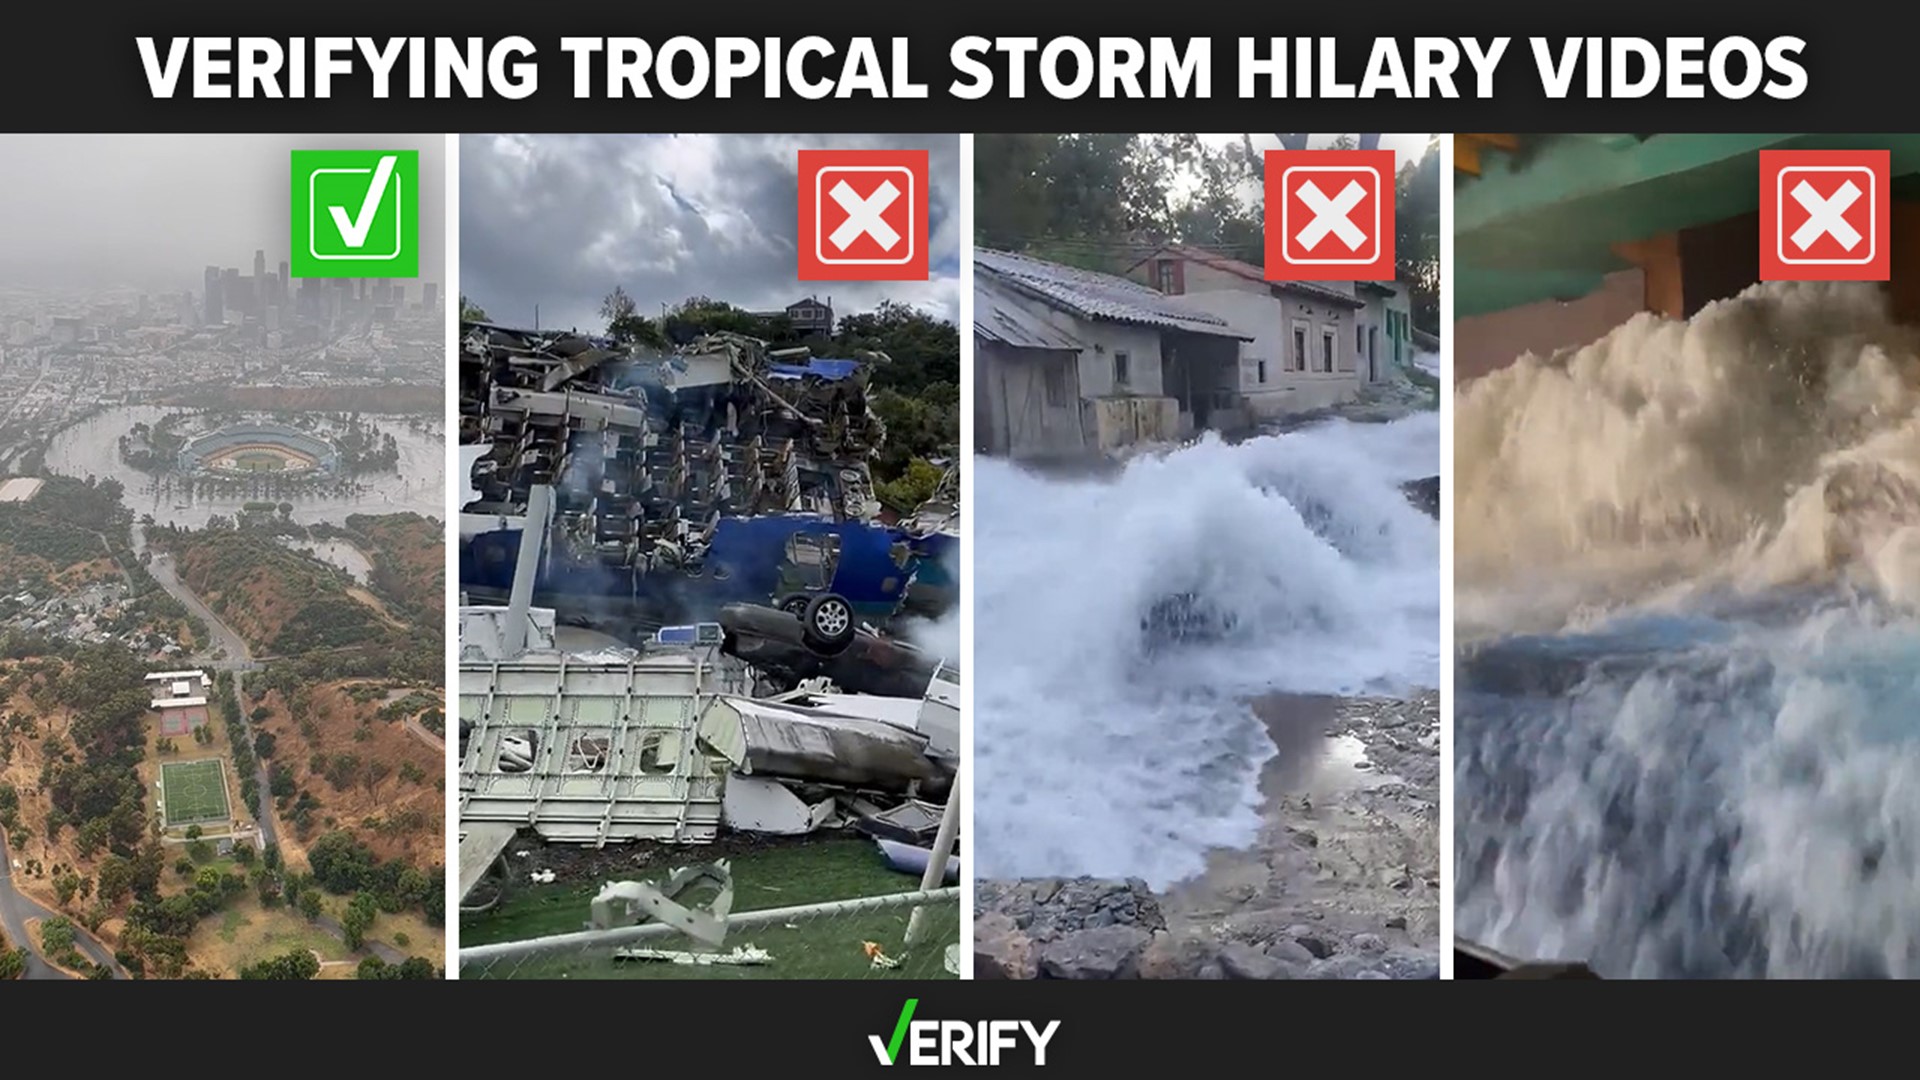 We verify whether several viral videos that claim to show damage from Tropical Storm Hilary are real.